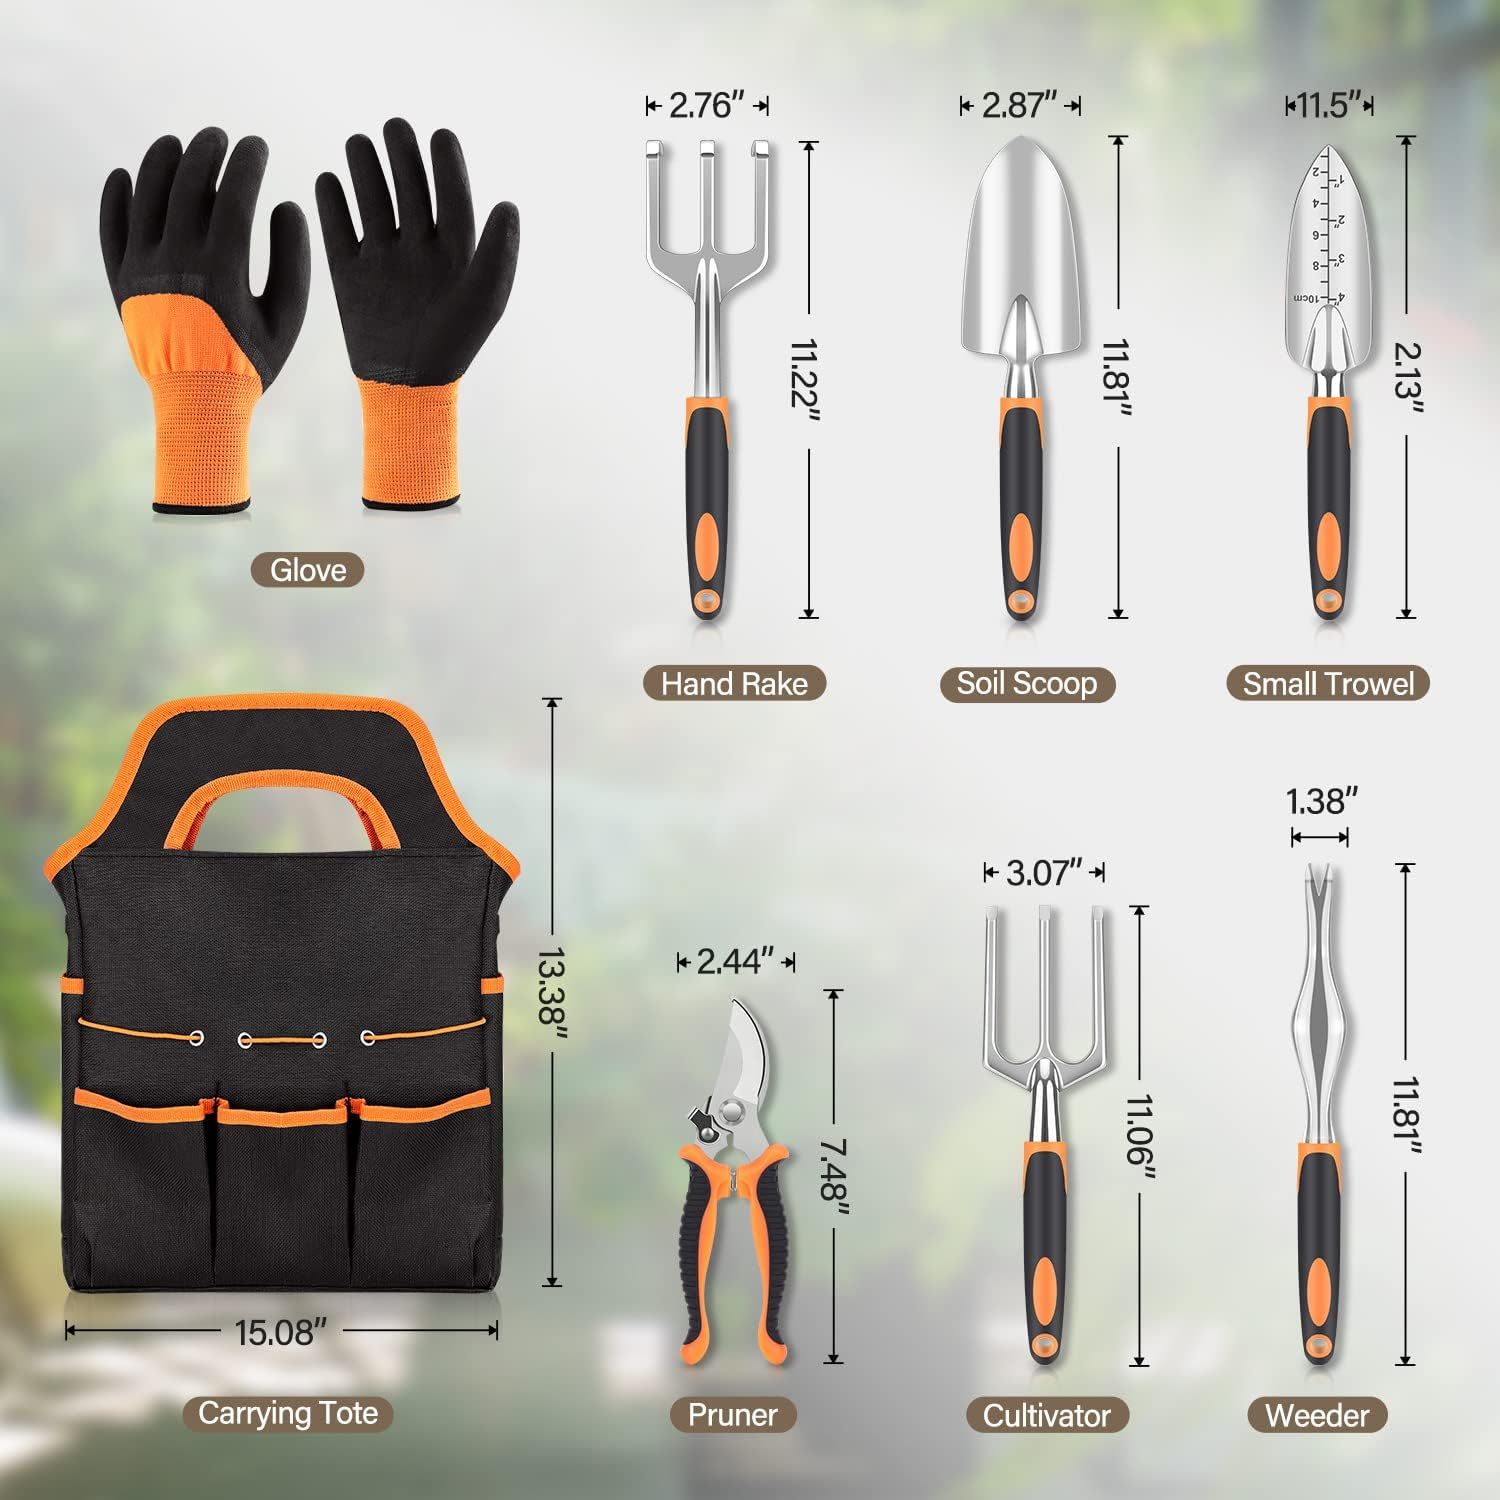 set of 8 garden tool heavy duty and lightweight aluminium alloy tools with non slip ergonomic handle orange durable storage tote bag gardening hand tools for women and men